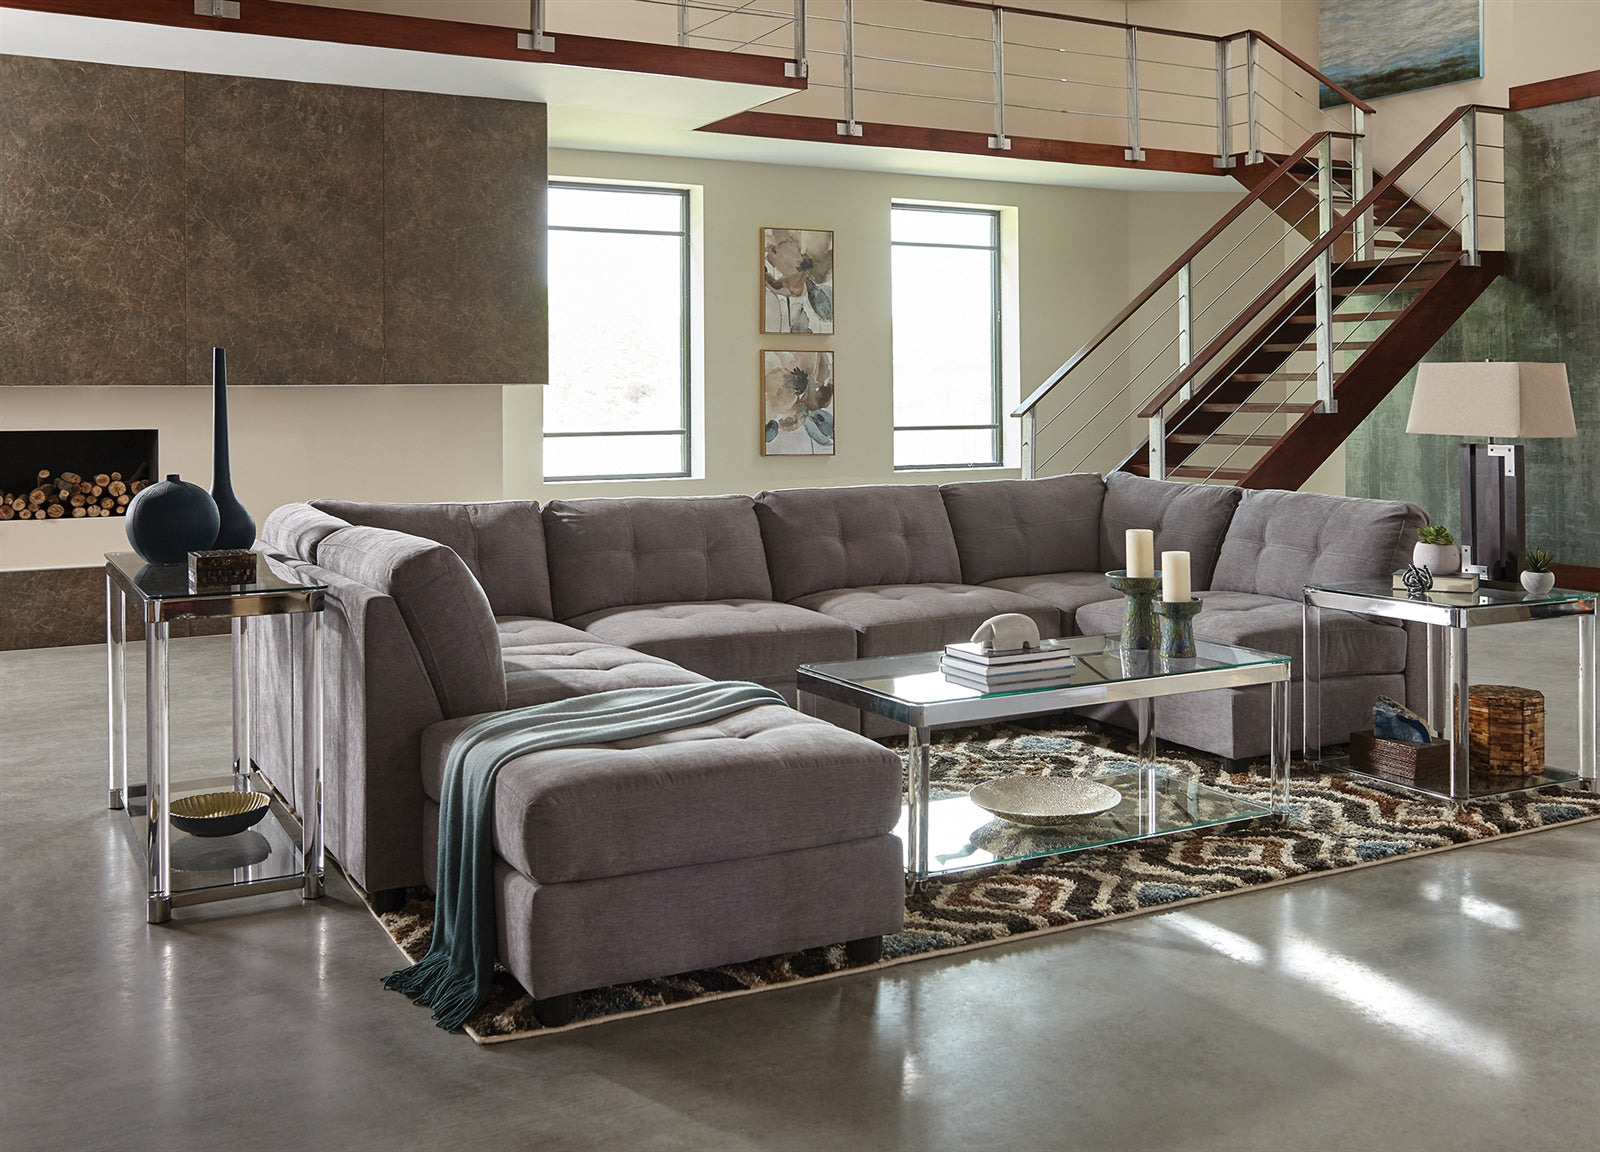 Claude 7 Piece Modular Sectional Sofa in Grey Padded Microfiber Upholstery